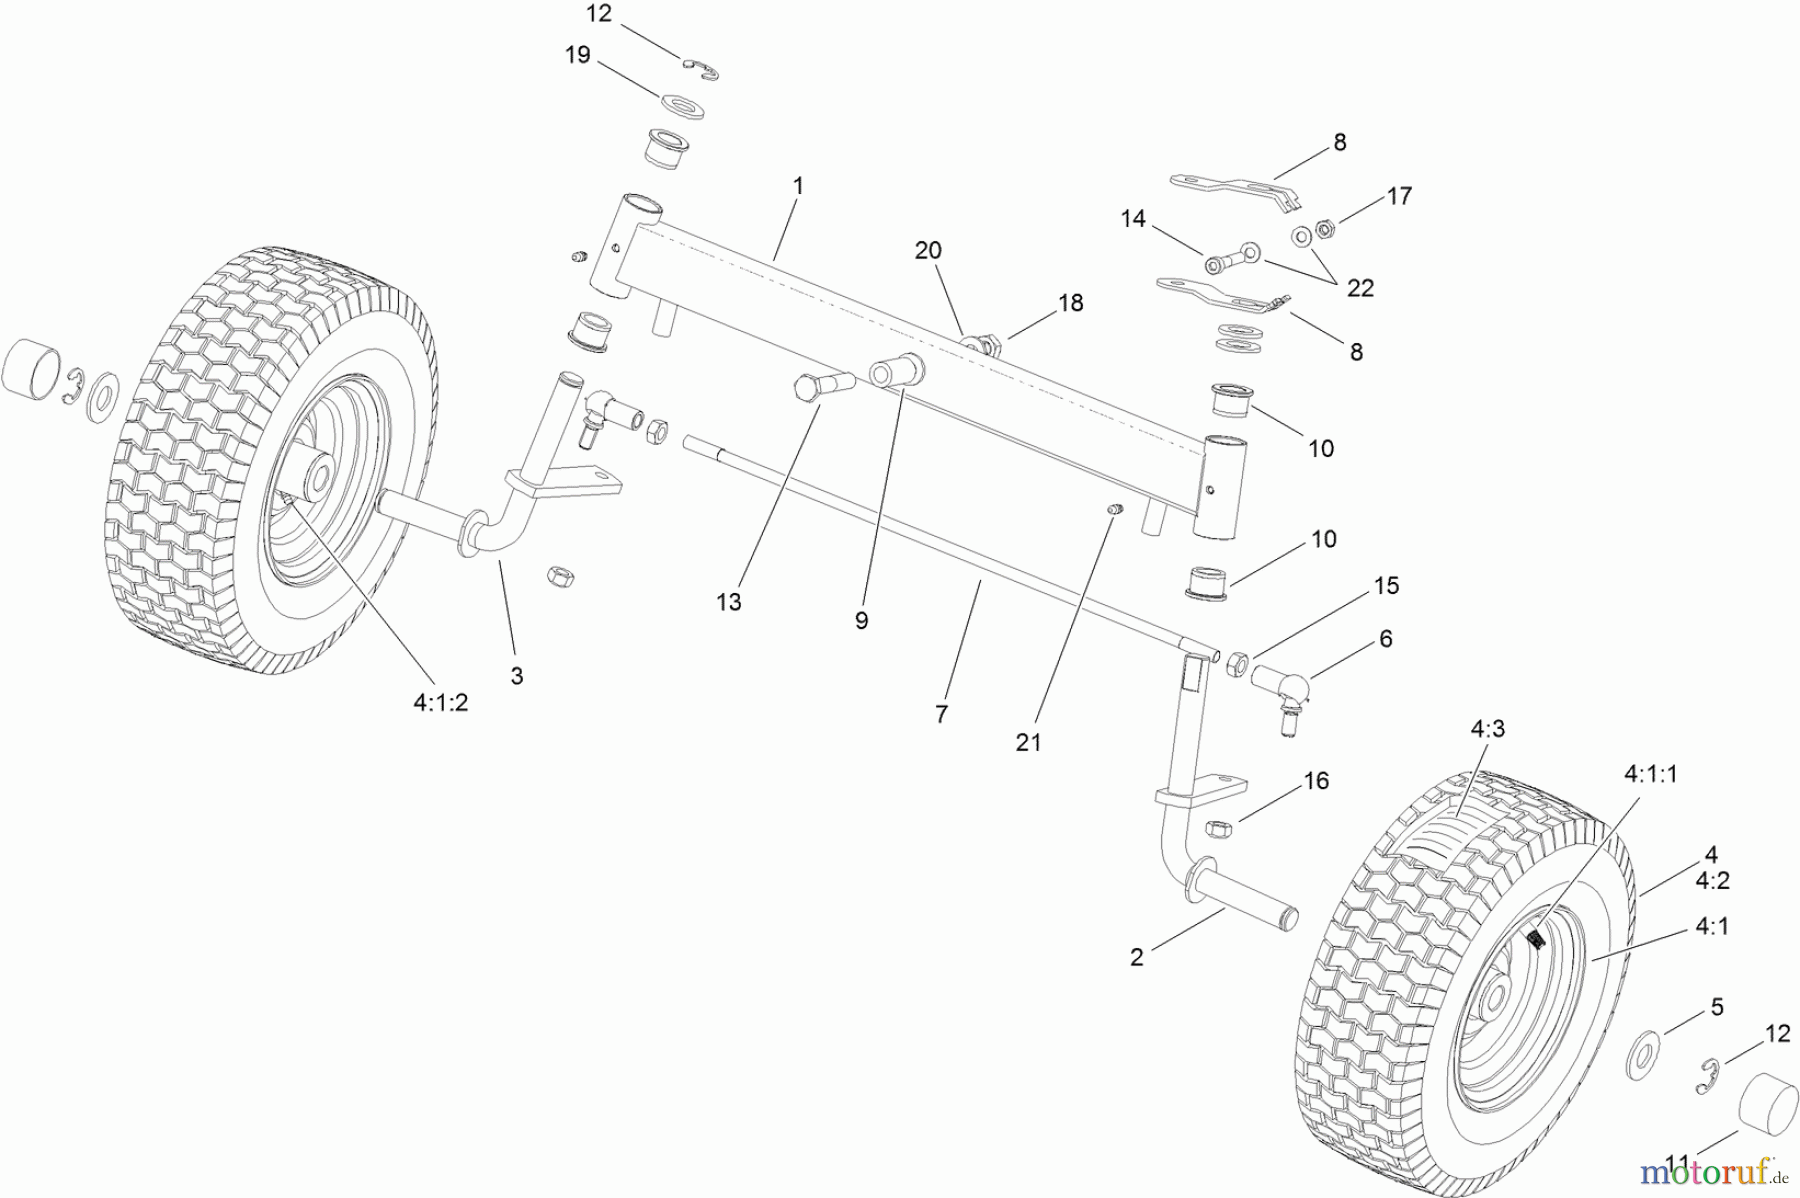  Toro Neu Mowers, Lawn & Garden Tractor Seite 1 74560 (DH 140) - Toro DH 140 Lawn Tractor, 2011 (311000001-311999999) FRONT AXLE ASSEMBLY